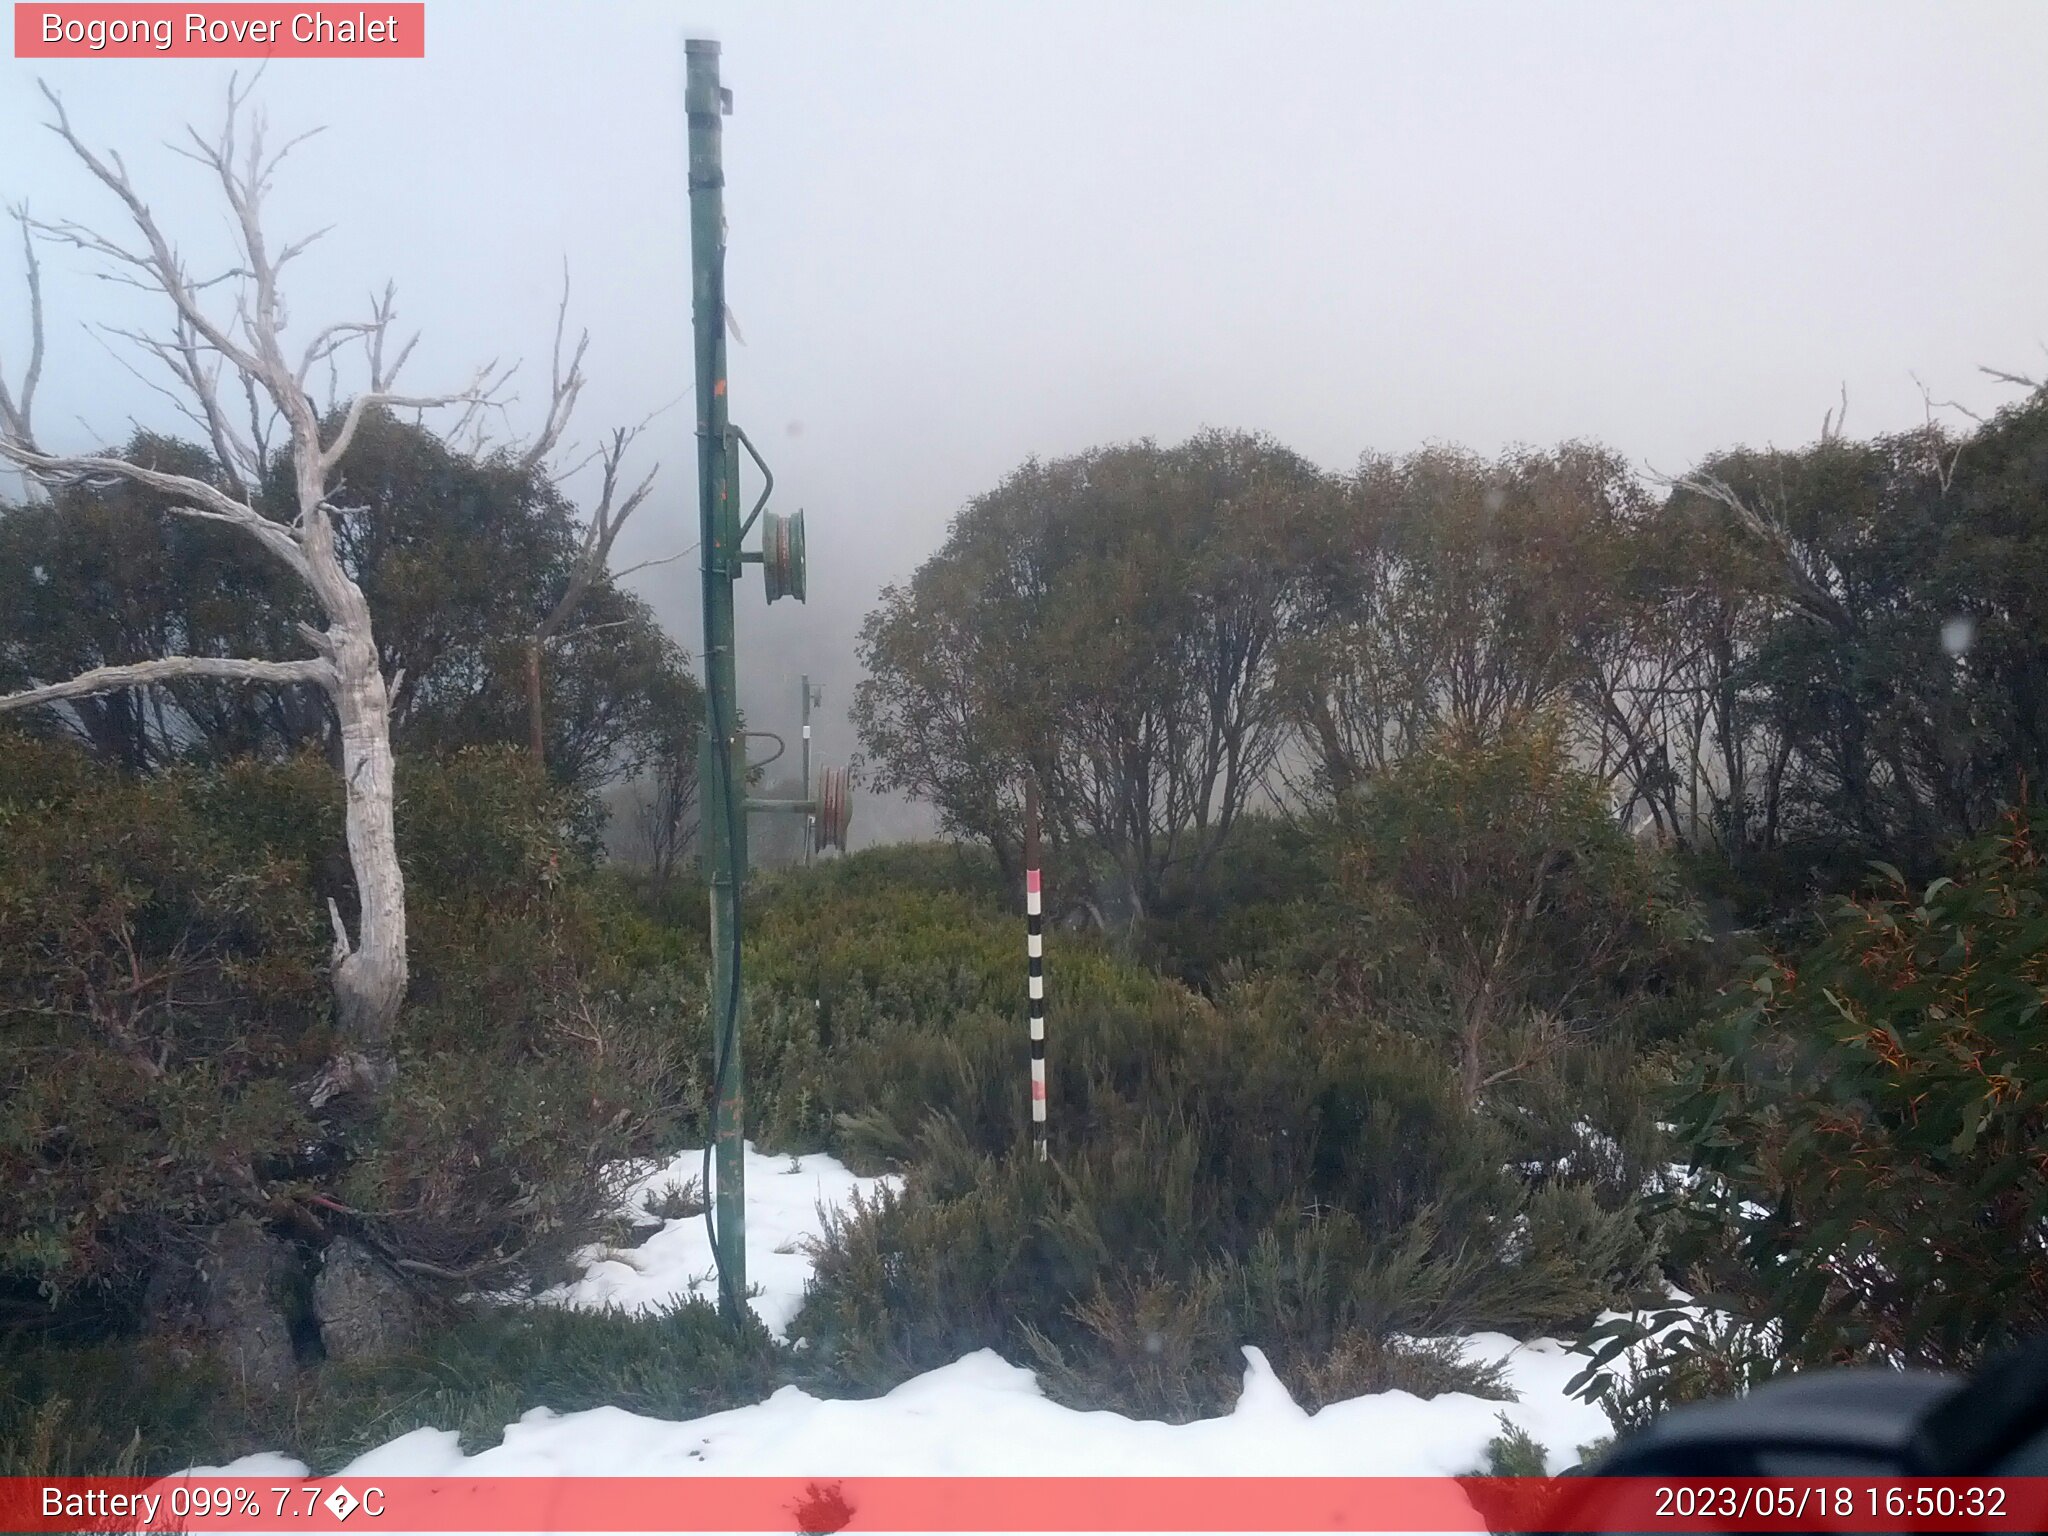 Bogong Web Cam 4:50pm Thursday 18th of May 2023